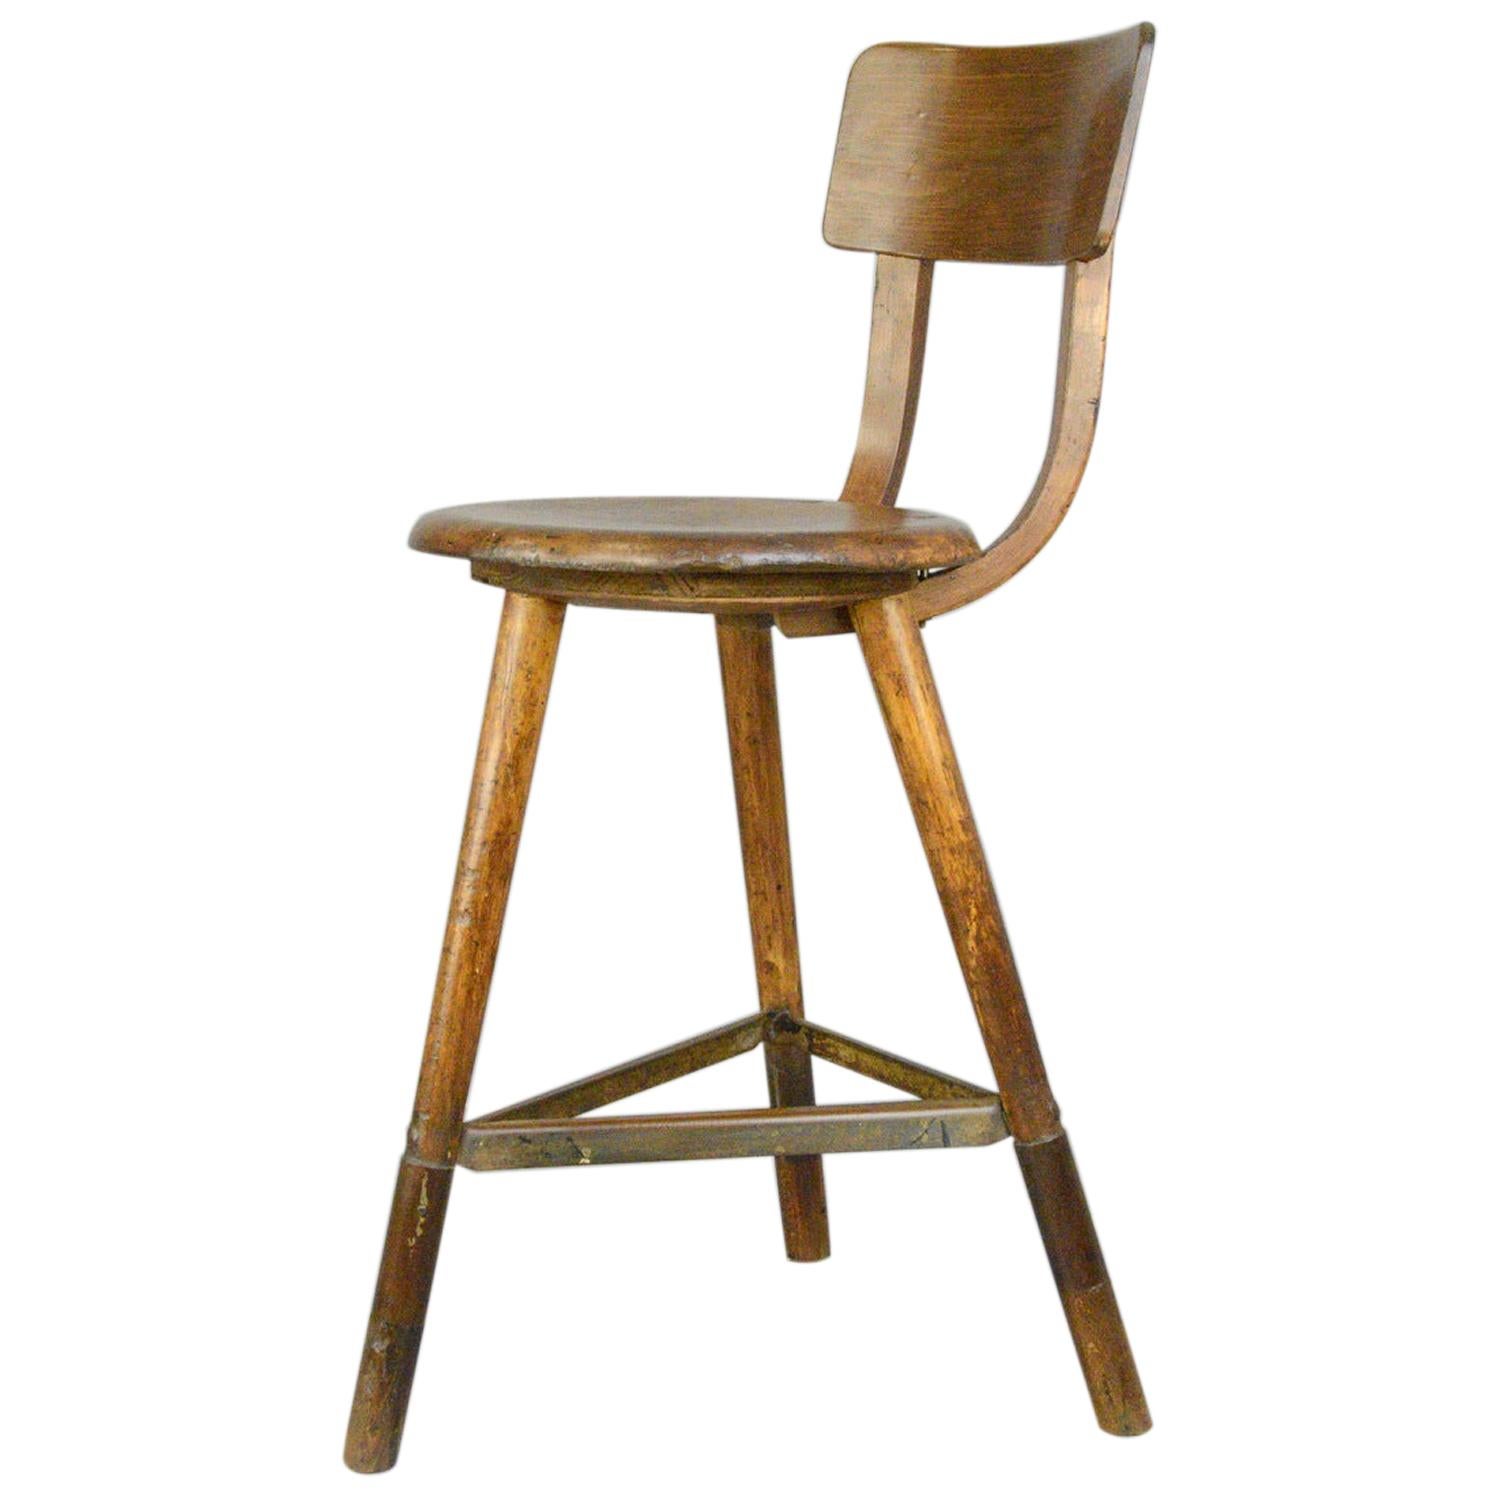 Industrial Work Stool by Ama, circa 1920s